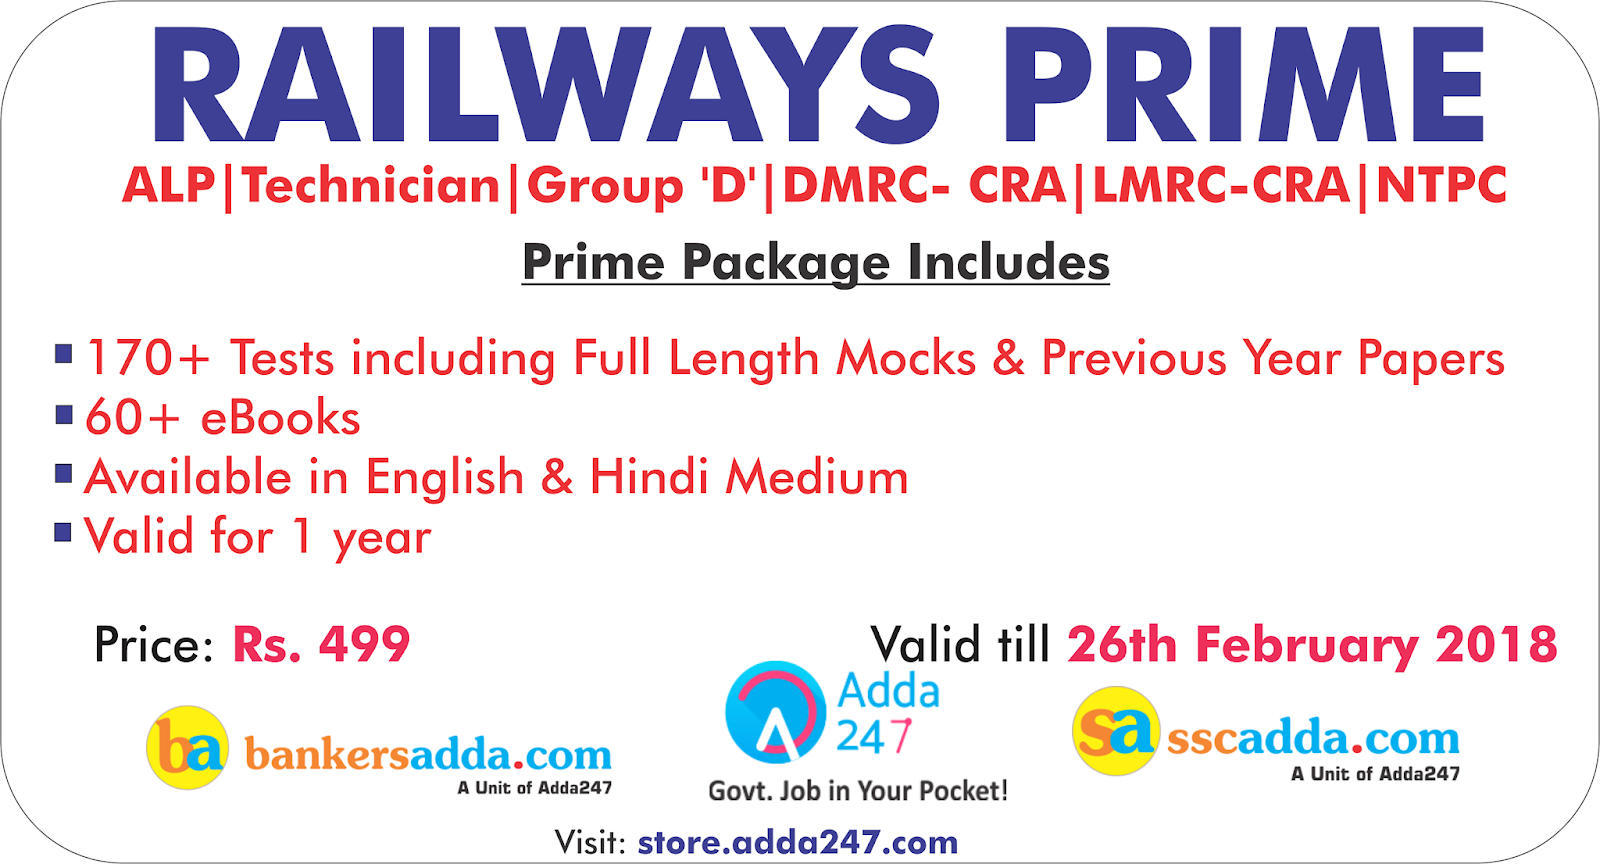 Railway Prime: The Complete Package For Railway Examinations 2018 (Hindi Medium) | Latest Hindi Banking jobs_3.1